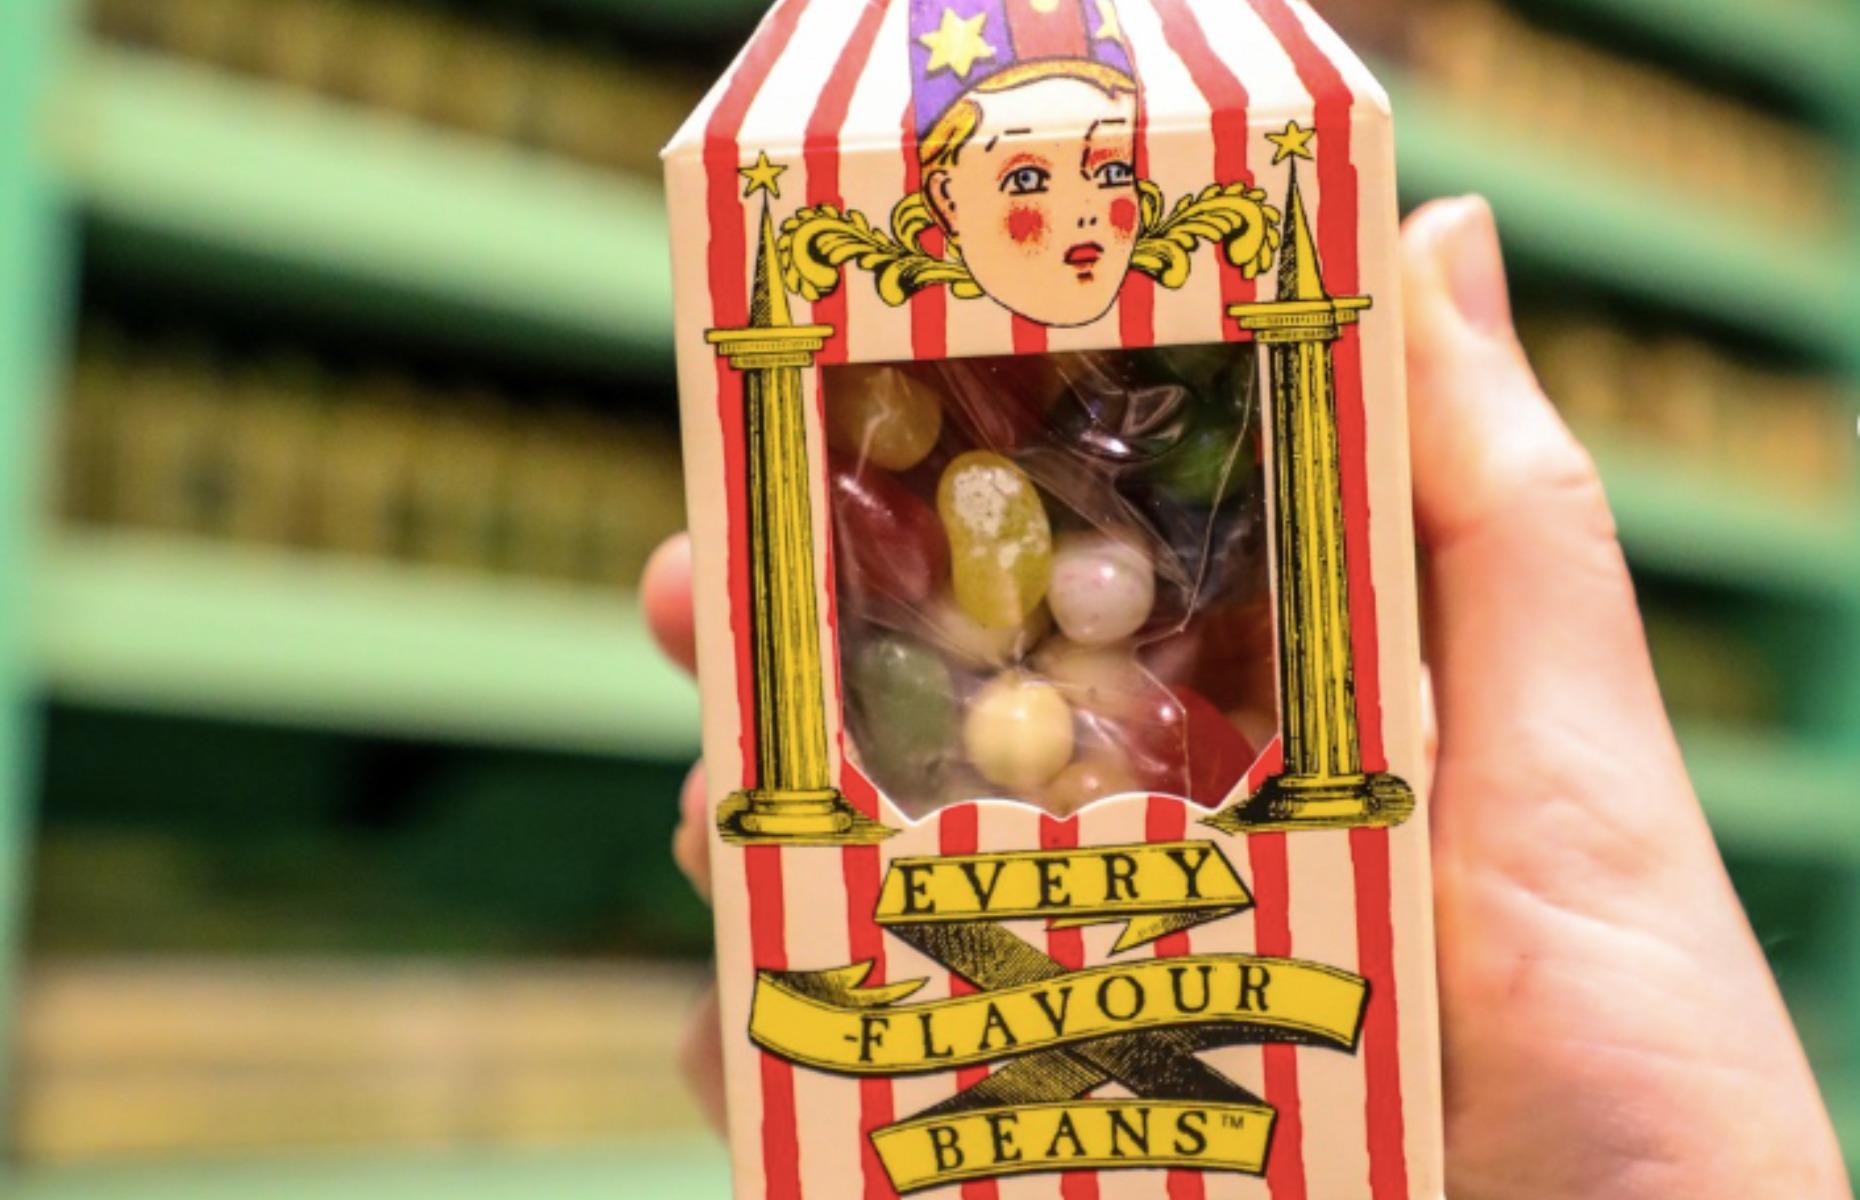 <p>If you've always fancied trying Bertie Bott’s Every Flavour Beans, the curious confectionery from the lunch trolley on board the Hogwarts Express, here’s your chance. With 20 flavours, from marshmallow and tutti-frutti to grass and earwax, you could end up with either a delicious –or disgusting – jellybean bite. Available at the Warner Bros. Studio Tour London, they're perfect for keeping kids entertained, too.</p>